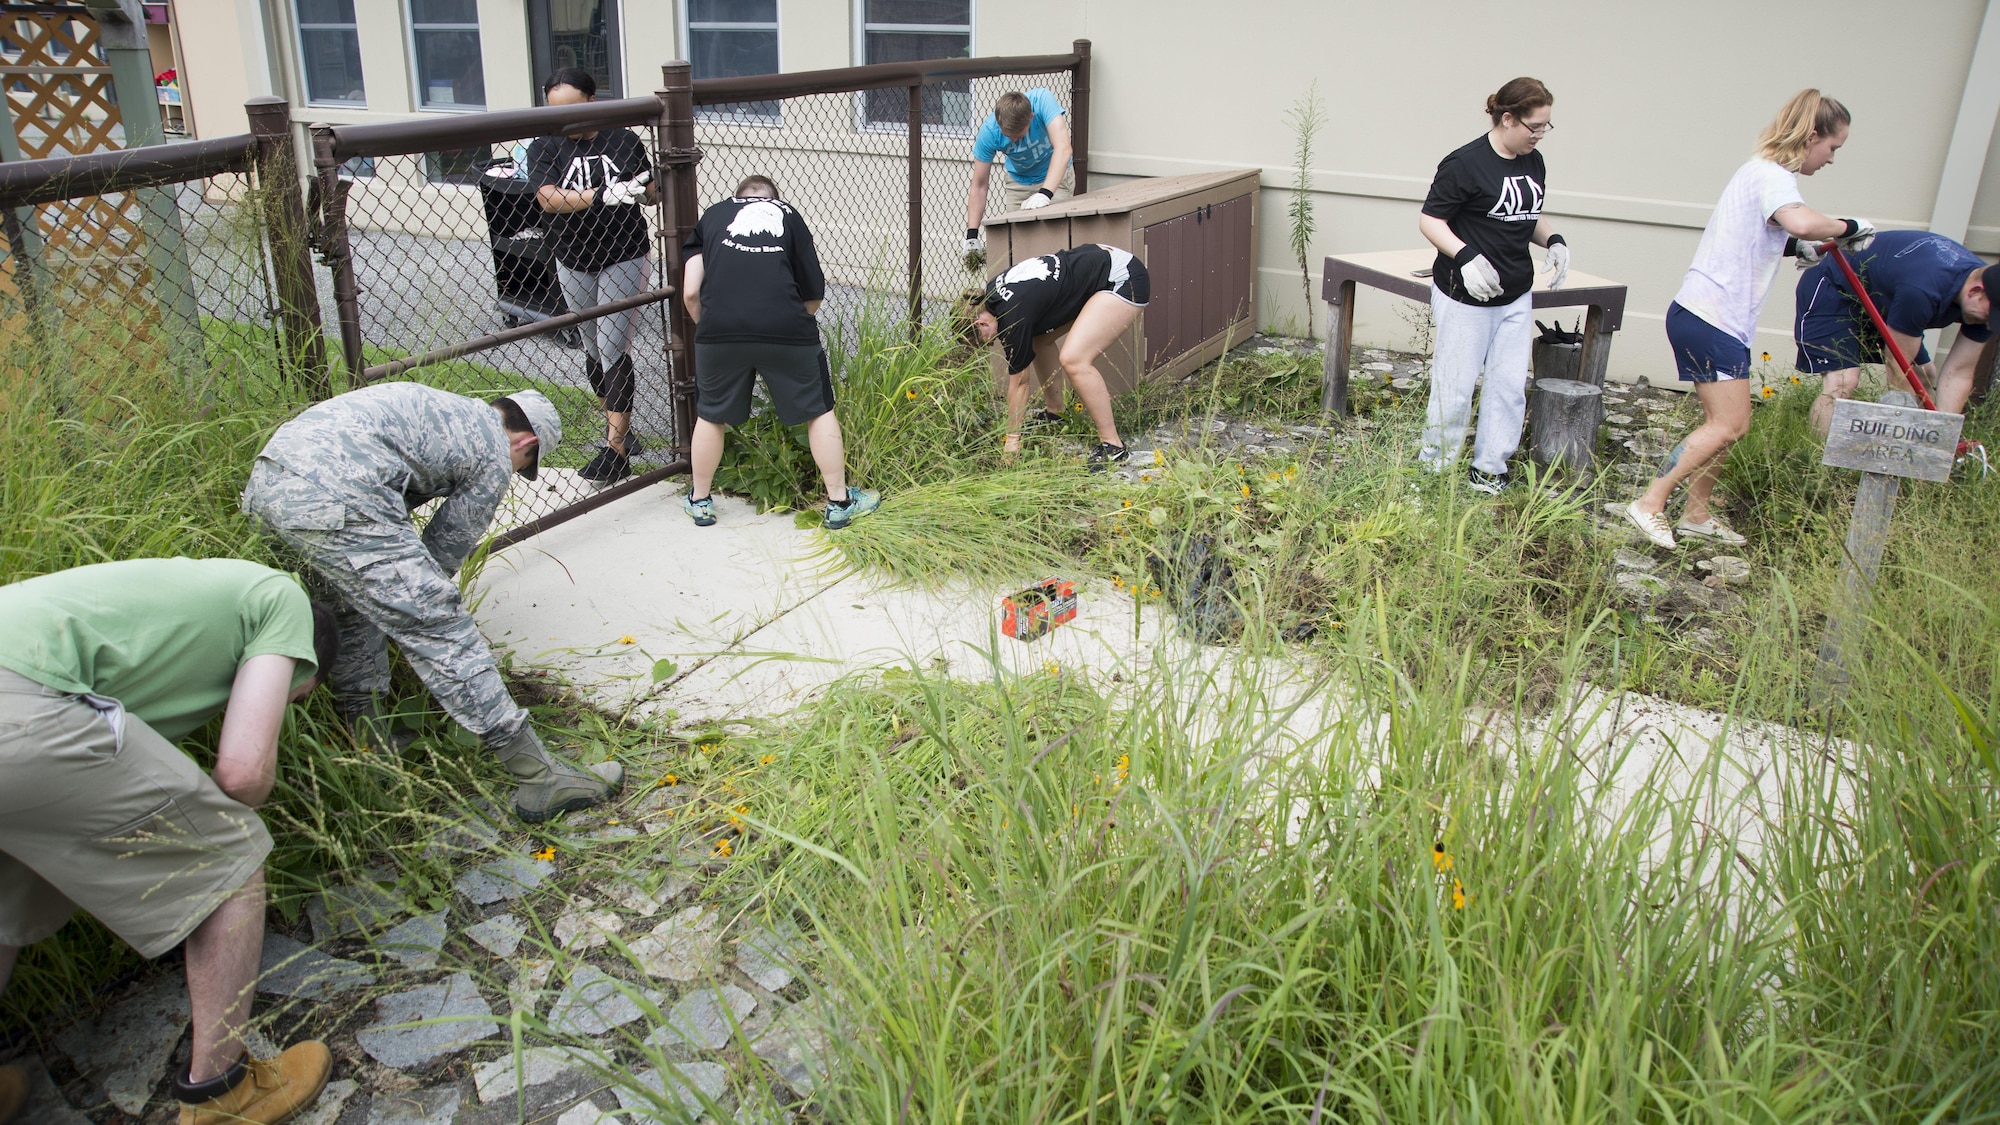 Airmen with the Airmen Committed to Excellence council clear out an area during a landscaping project July 27, 2017, at the Child Development Center on Dover Air Force Base, Del. The clean-up was to help the CDC prepare for an upcoming project for the children. (U.S. Air Force photo by Staff Sgt. Jared Duhon)